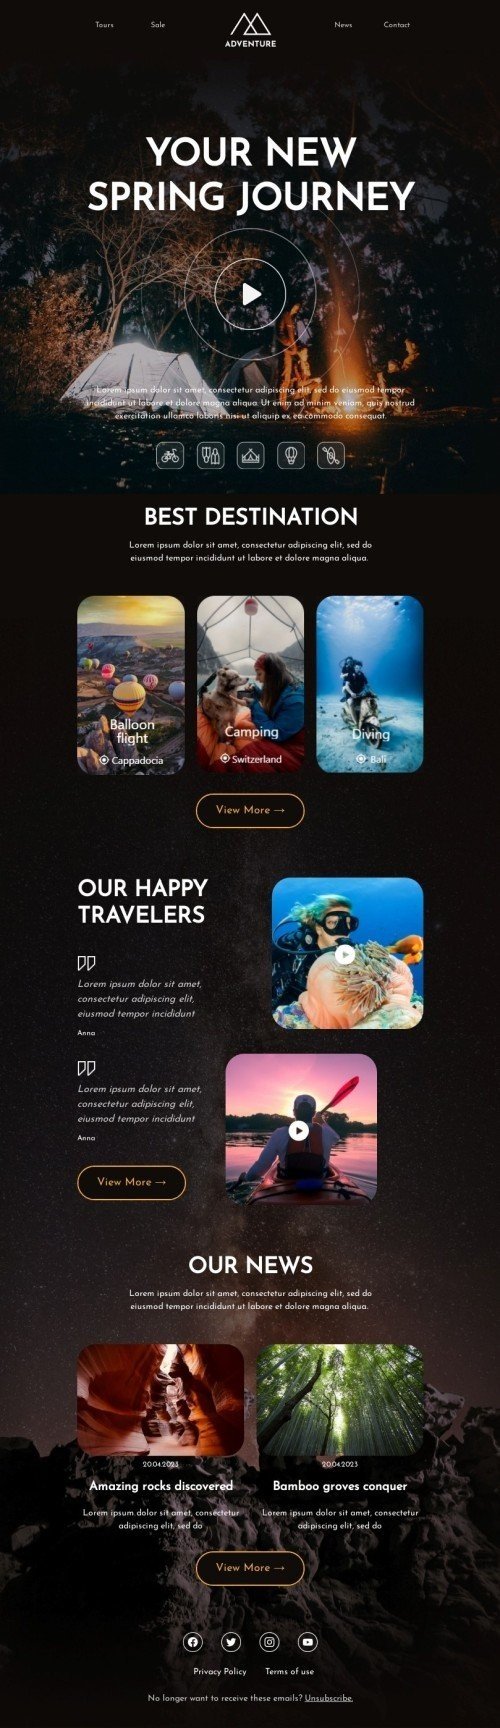 Spring email template "Spring journey" for travel industry desktop view